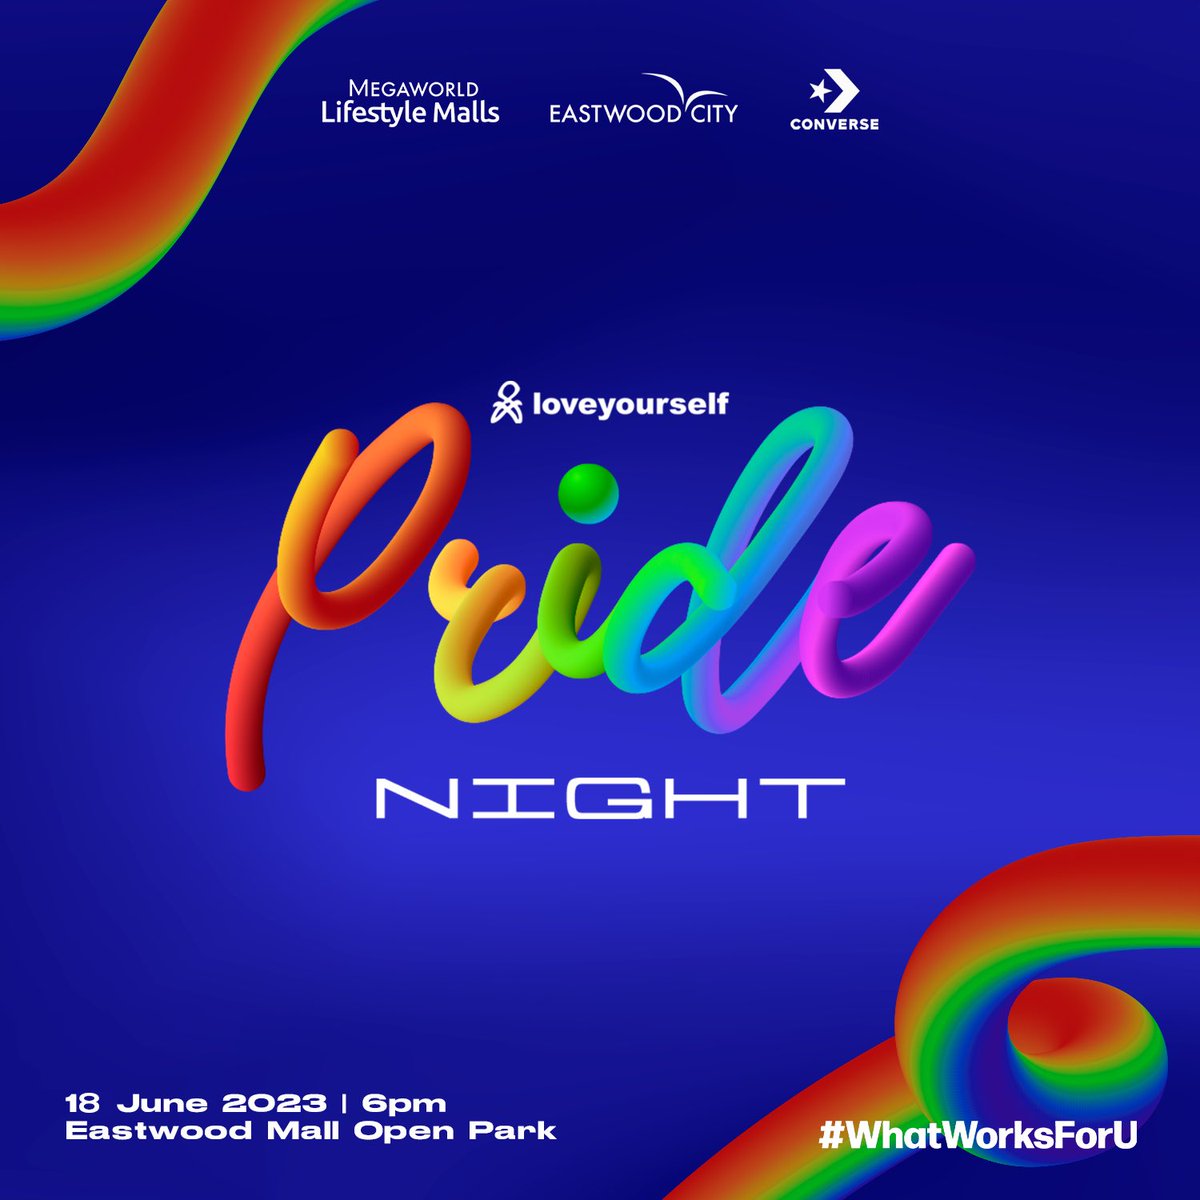 LOUD & PROUD! 

As part of the Pride Community, LoveYourself brings back PRIDE NIGHT in Eastwood City!

Save the date: 18 June 2023!

See you Lovers!

#LoveYourselfPh